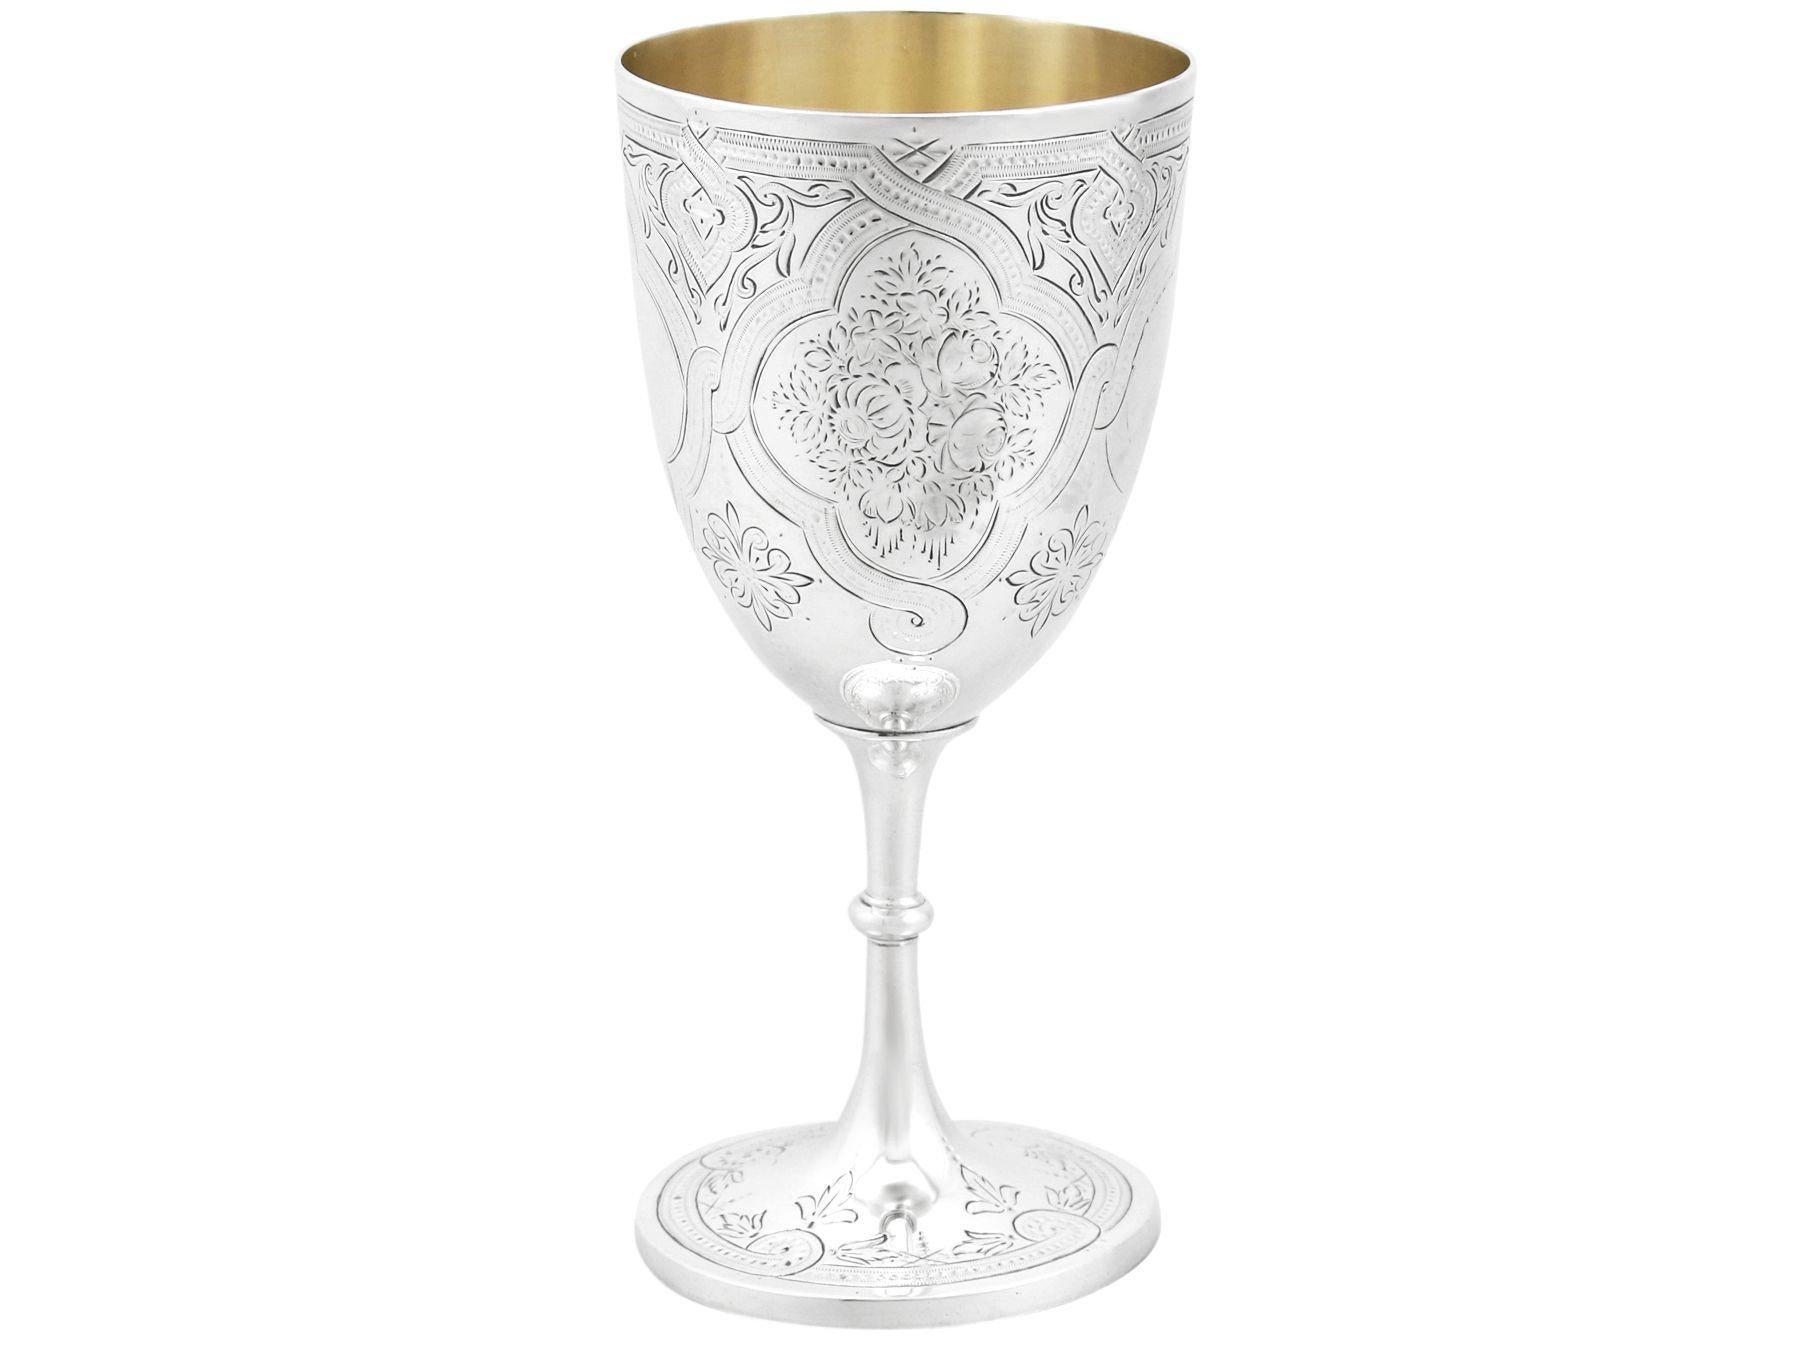 An exceptional, fine and impressive antique Victorian English sterling silver goblet made by George Adams; an addition to our collection of wine and drinks related silverware

This exceptional antique sterling silver goblet has a circular bell